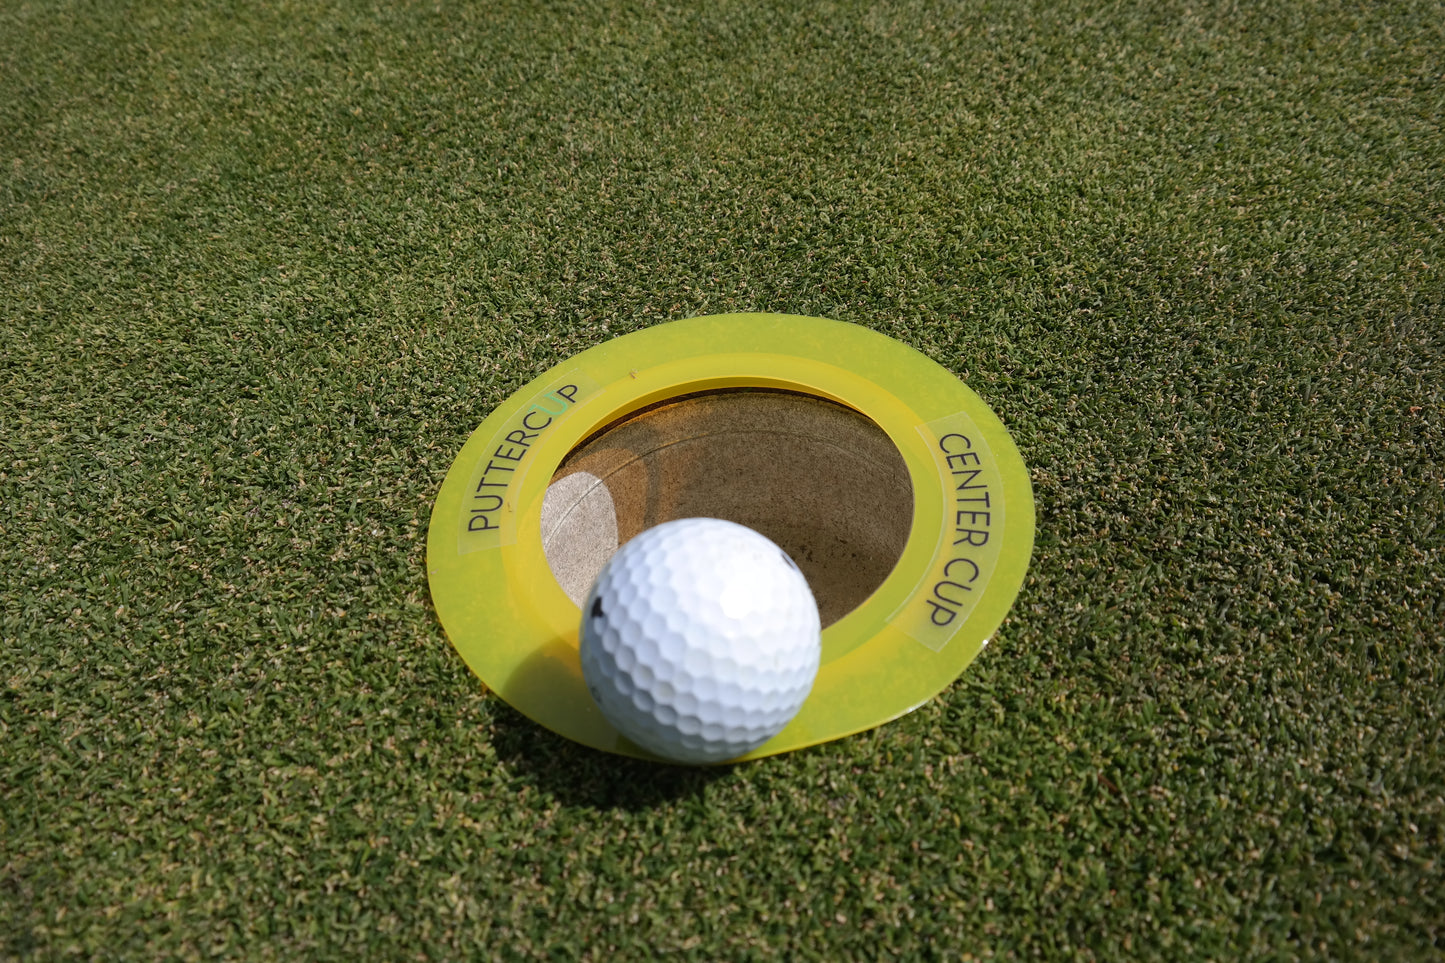 The Center Cup Putting Aid